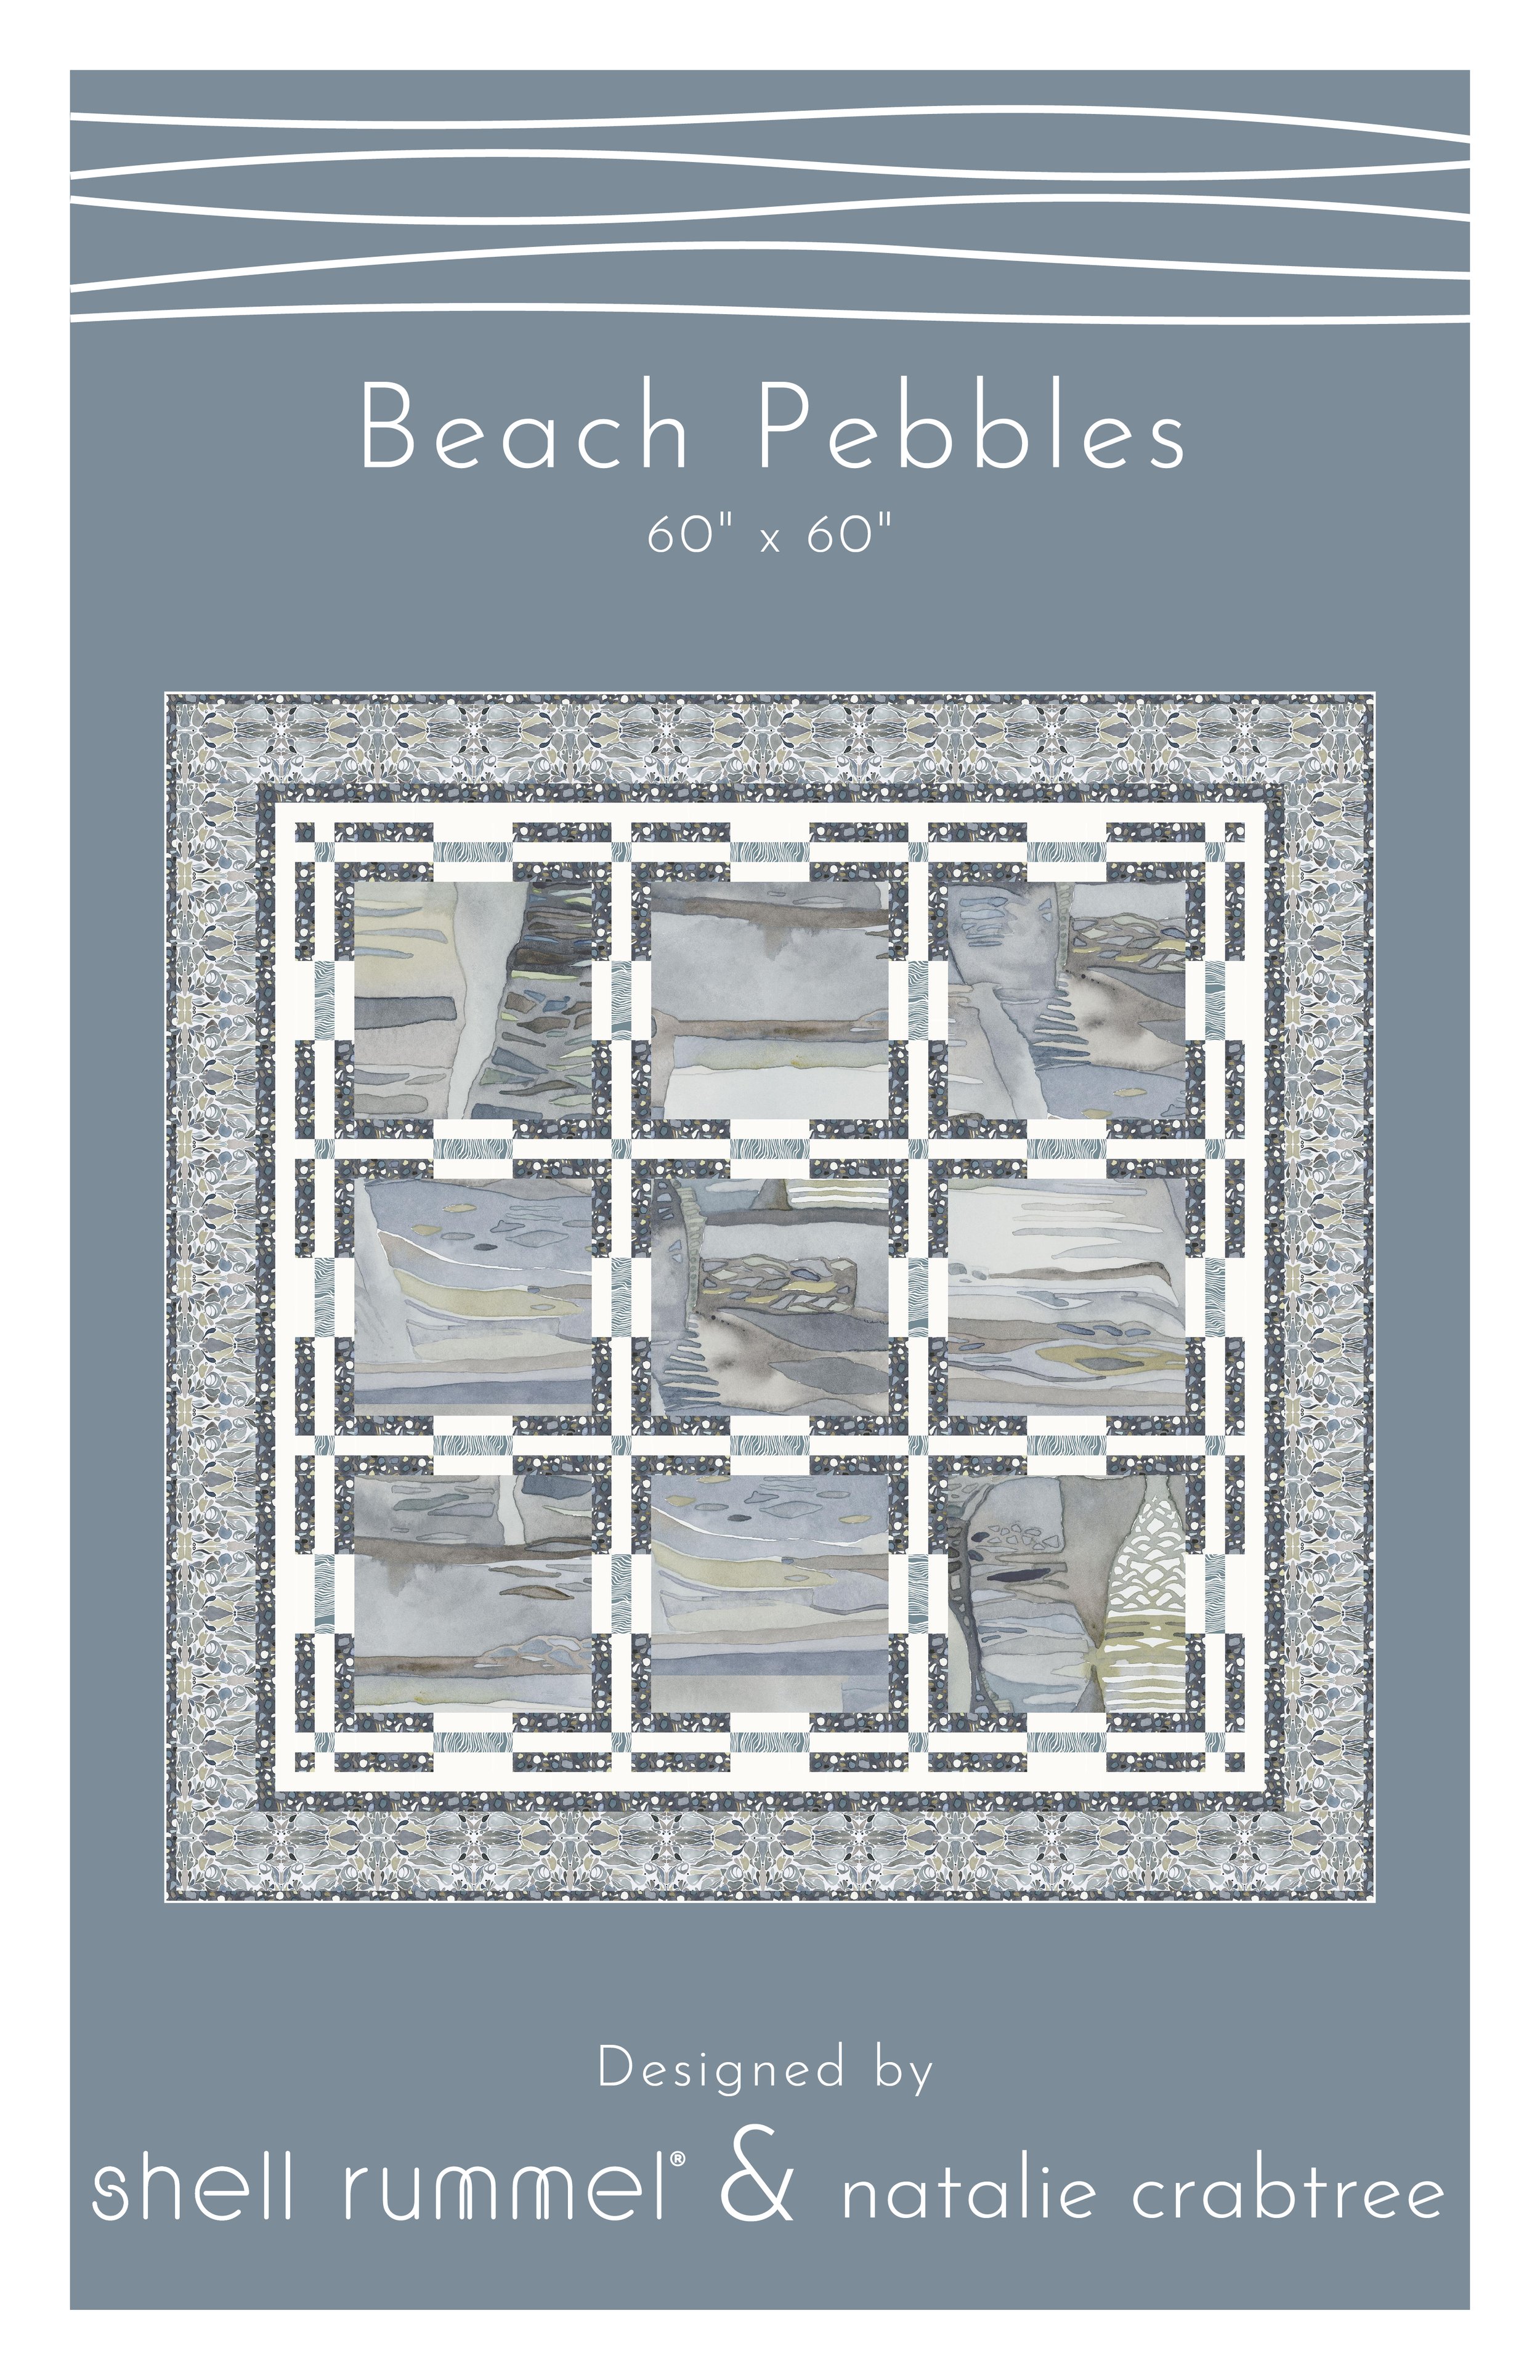 Beach Pebbles Sea Sisters Recolor Front Cover.jpg